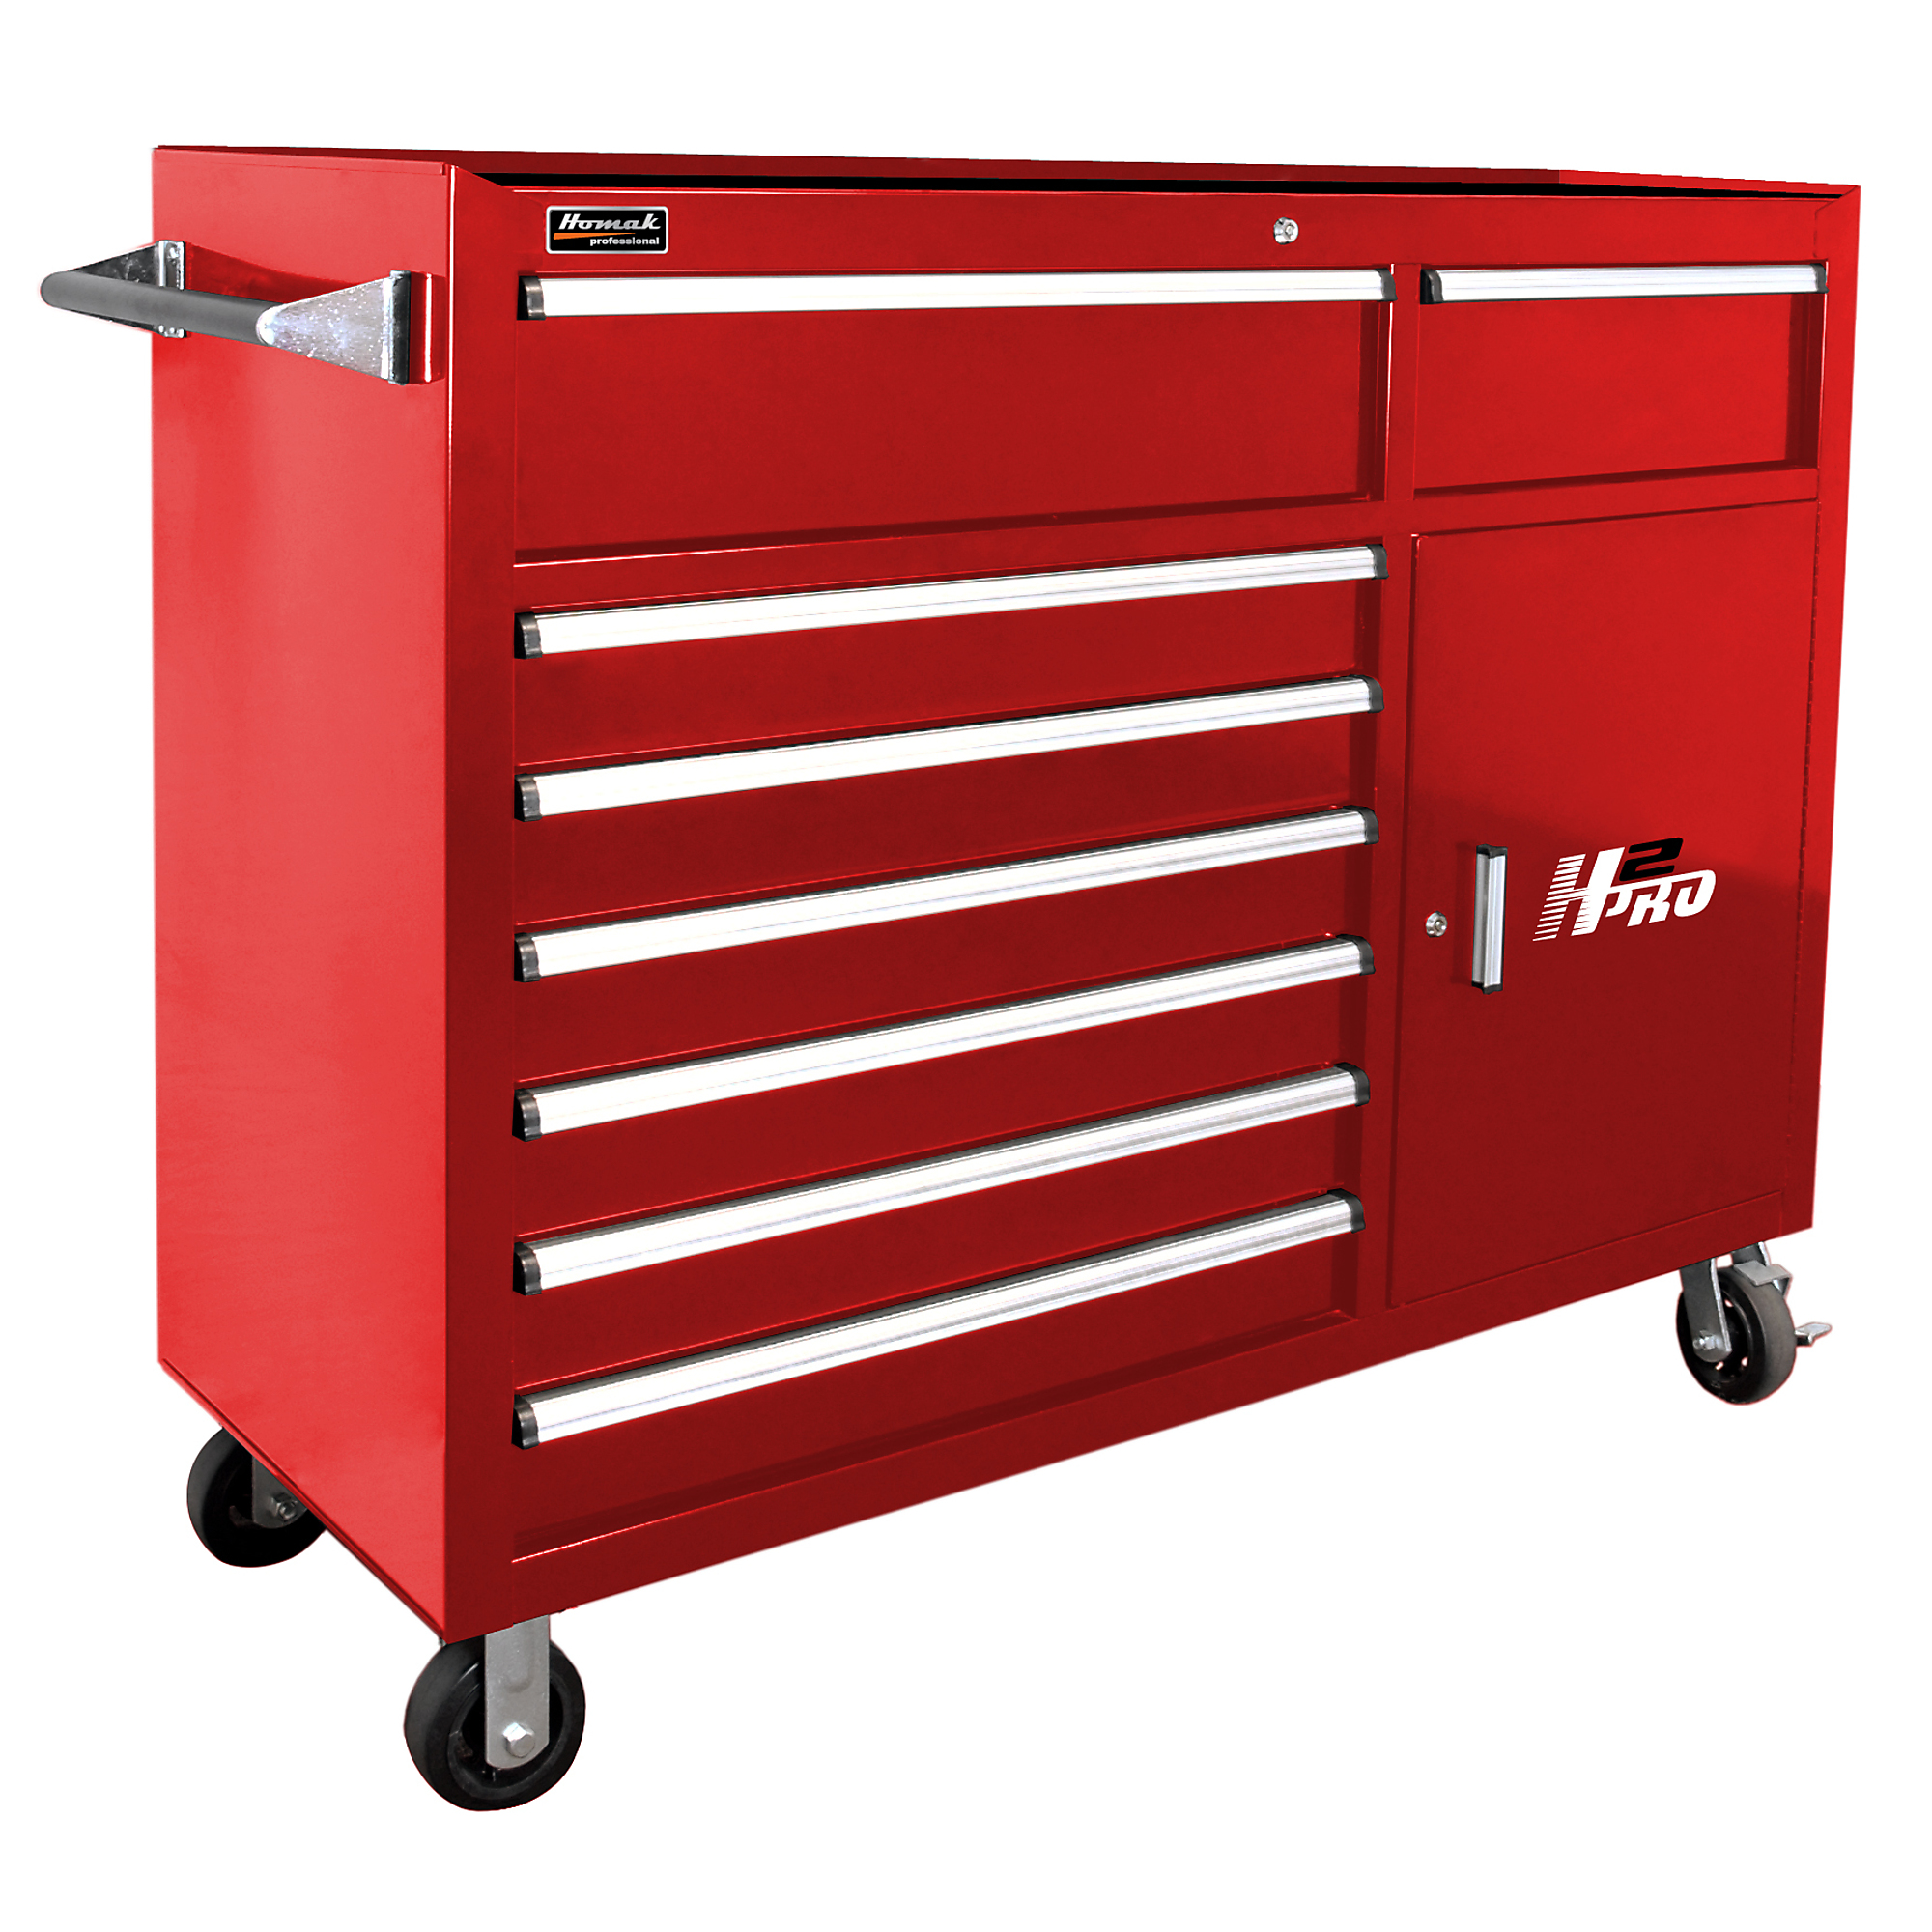 H2PRO Series 56Inch 8-Drawer Roller Tool Cabinet with 2 Compartment Drawers — Red, 56 1/4Inch W x 22 7/8Inch D x 45 7/8Inch H, Model - Homak RD04056082